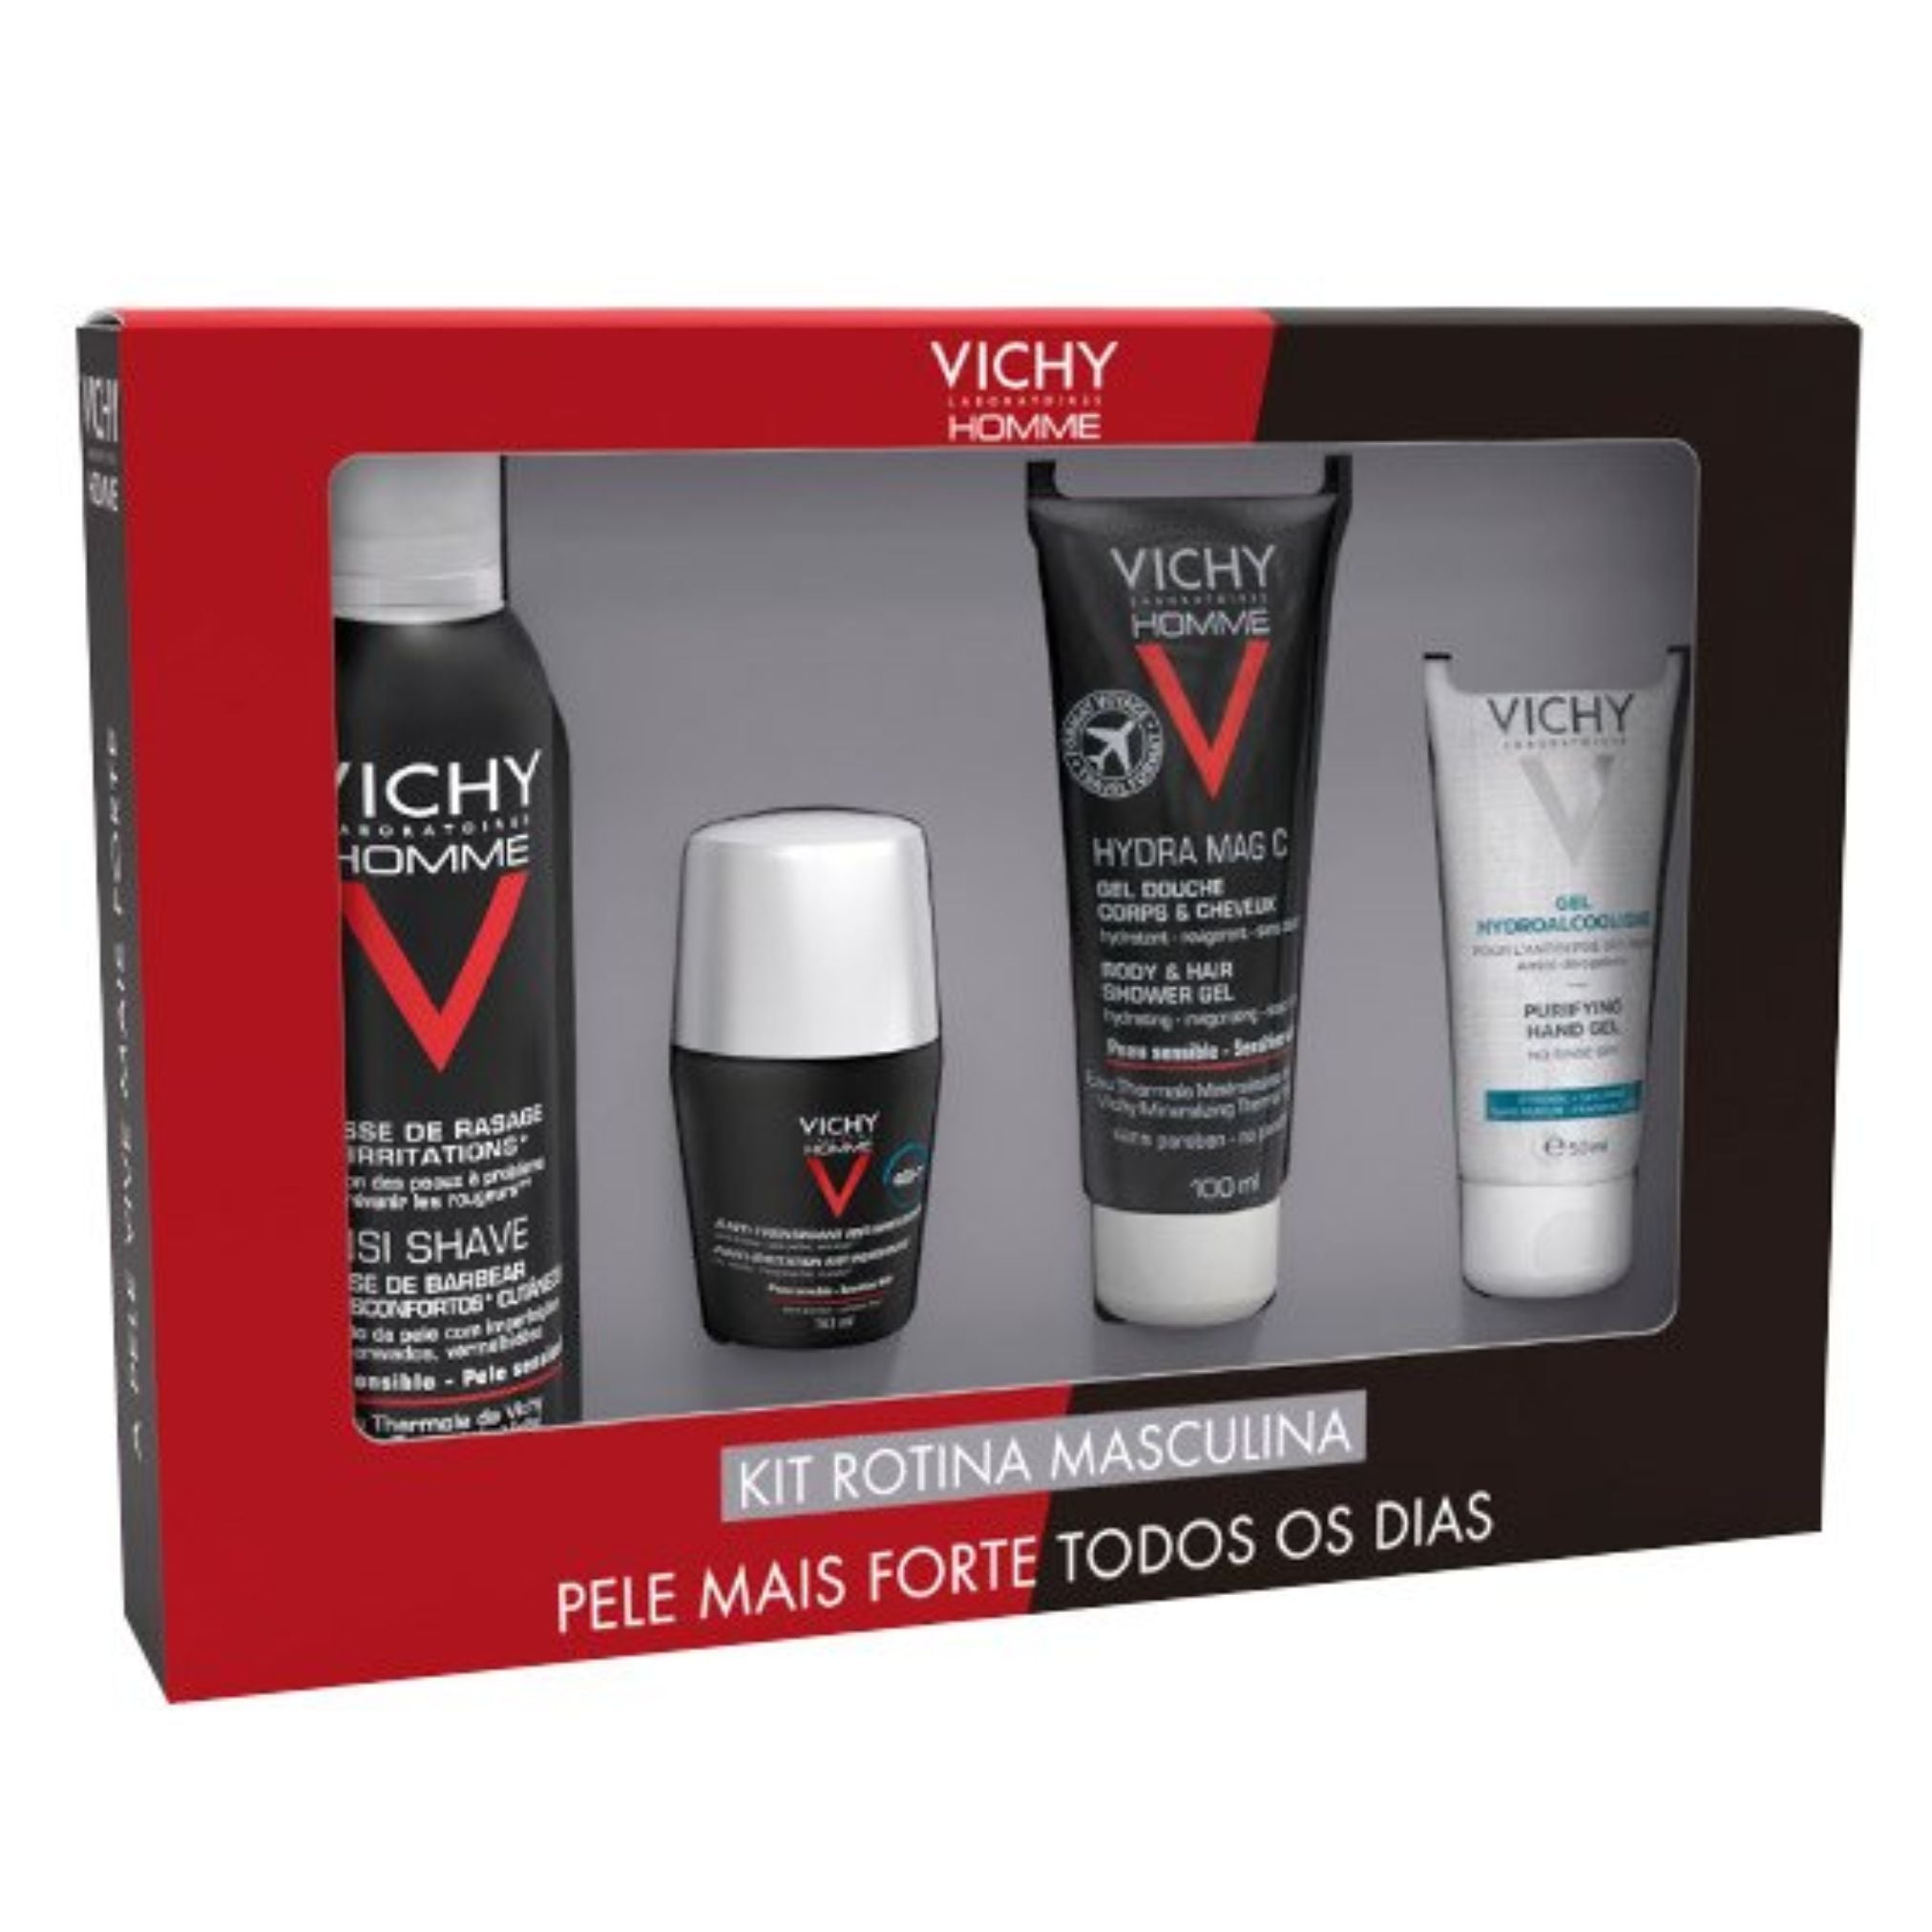 Vichy Promo Pack: Vichy Homme Daily Routine Kit